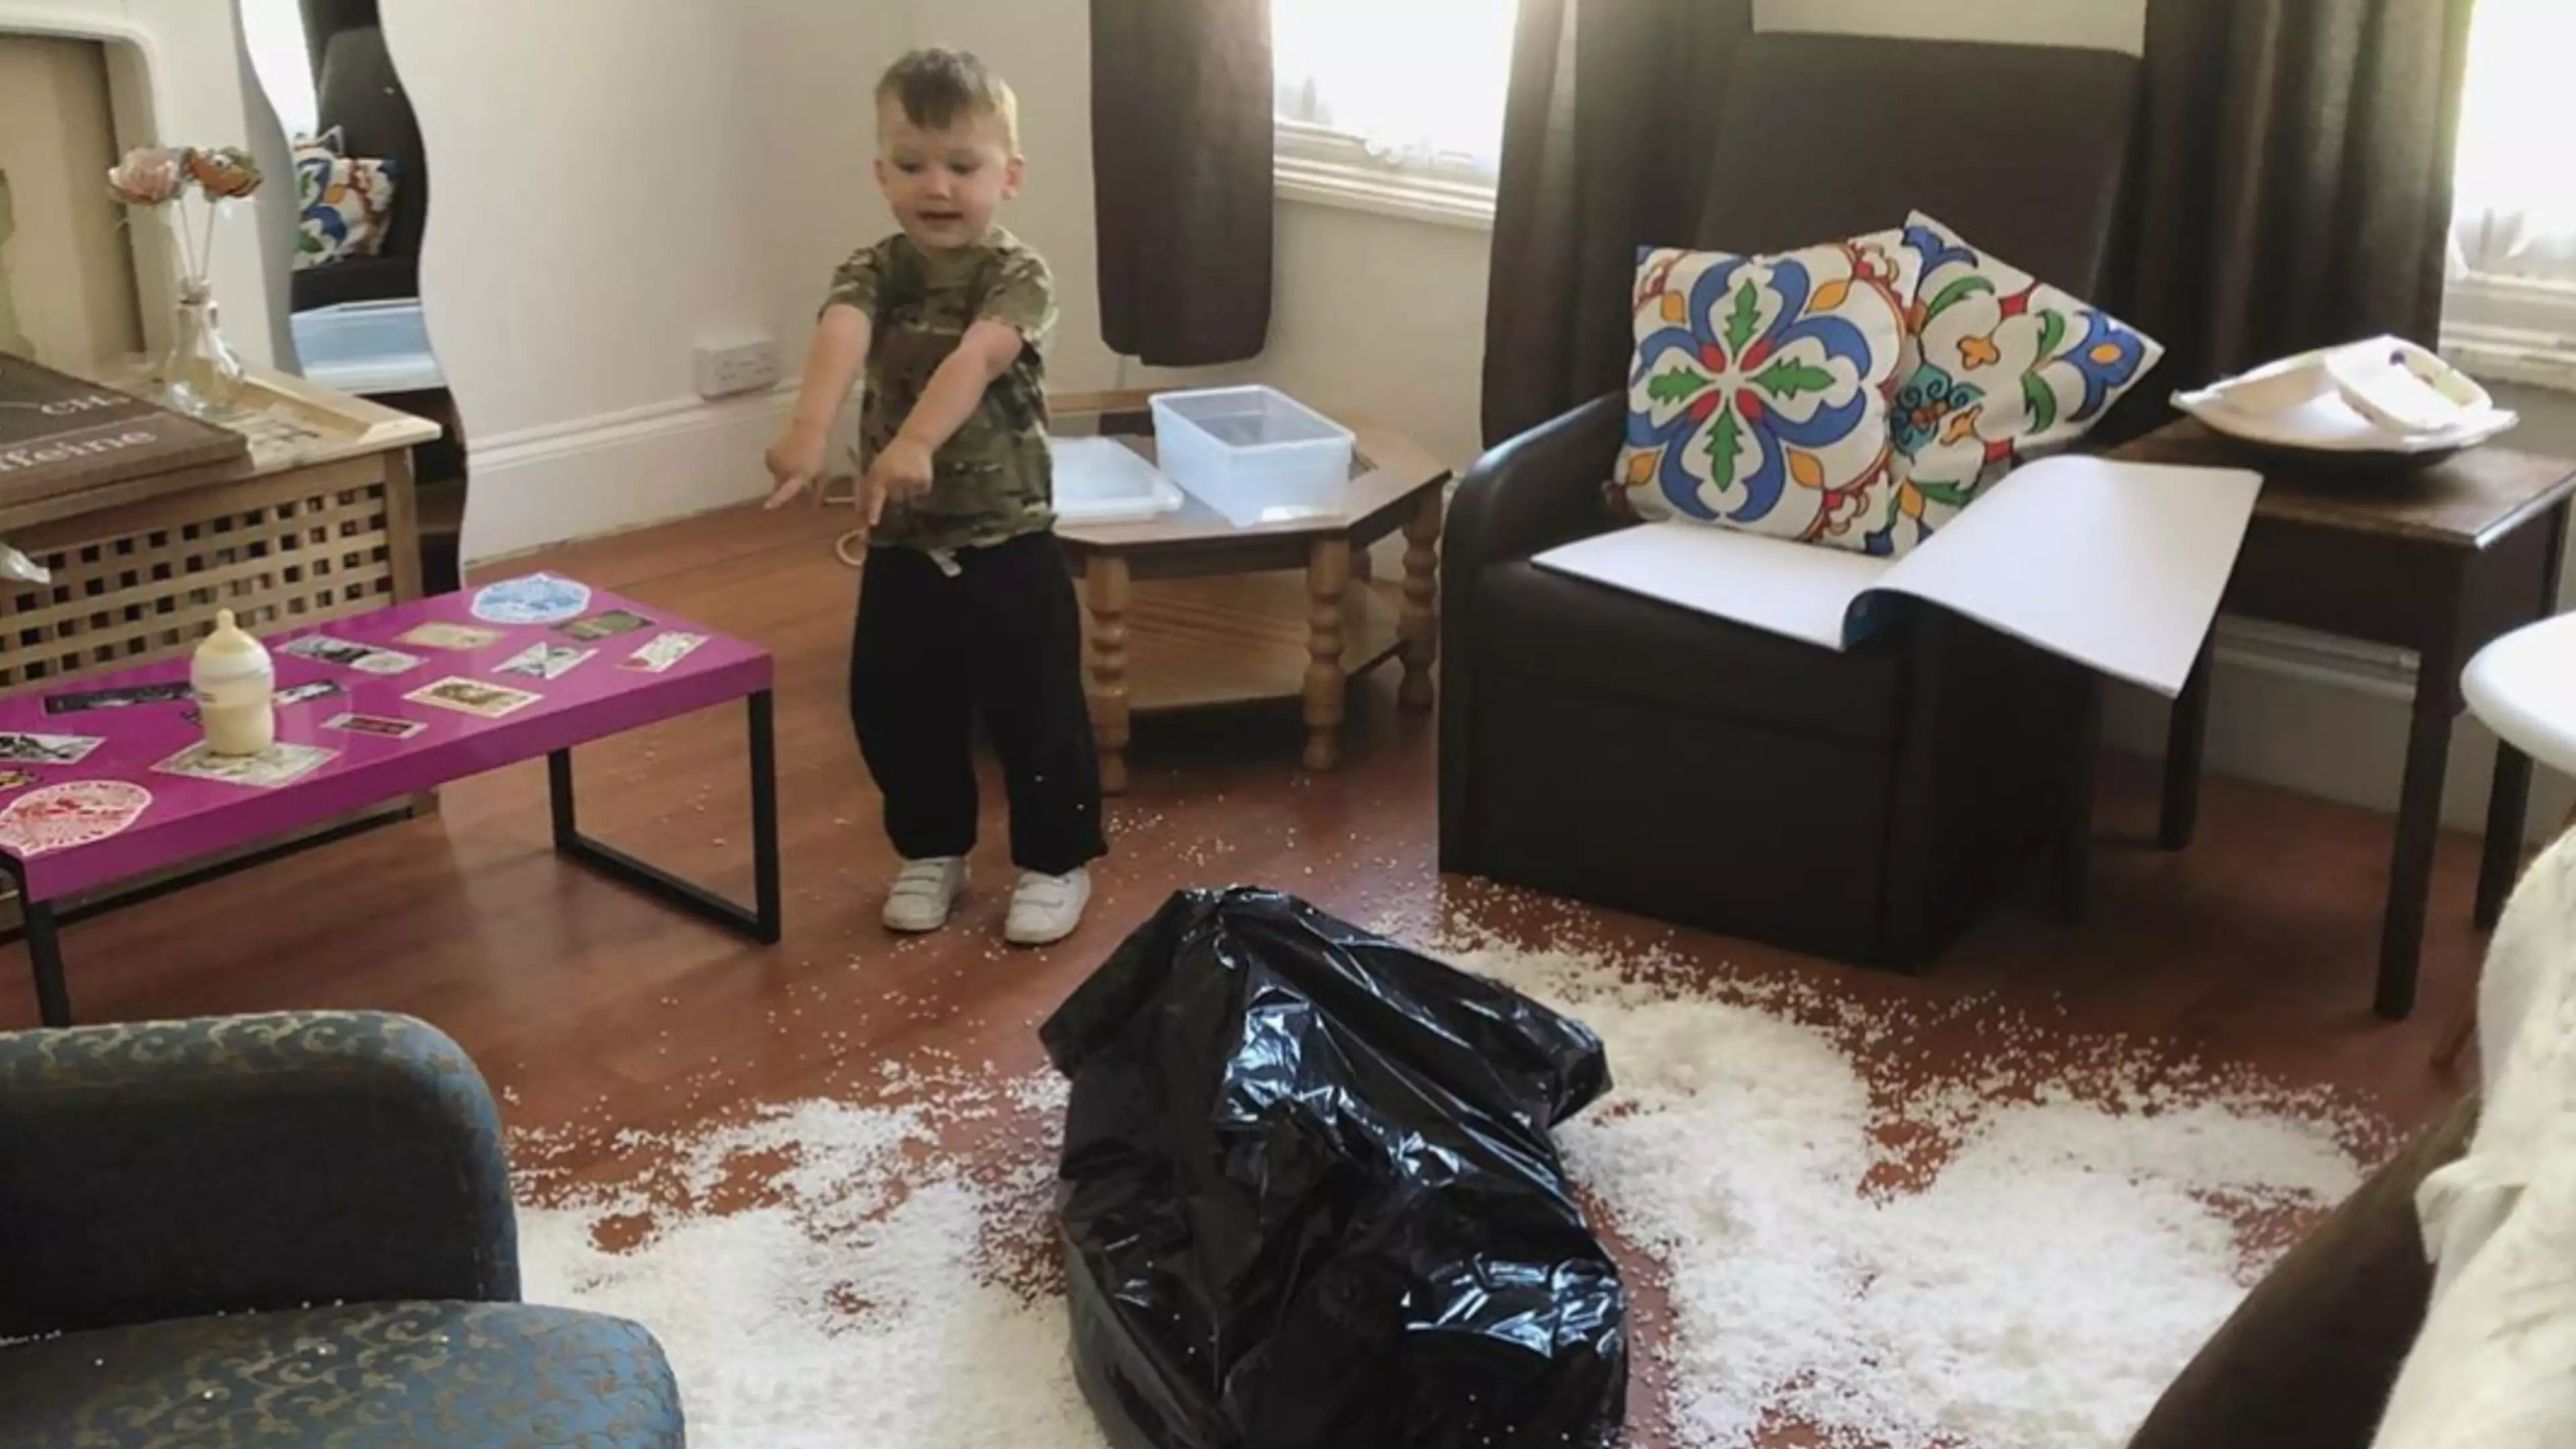 Mum Documents Her Son's Disasters In Hilariously Relatable Snaps